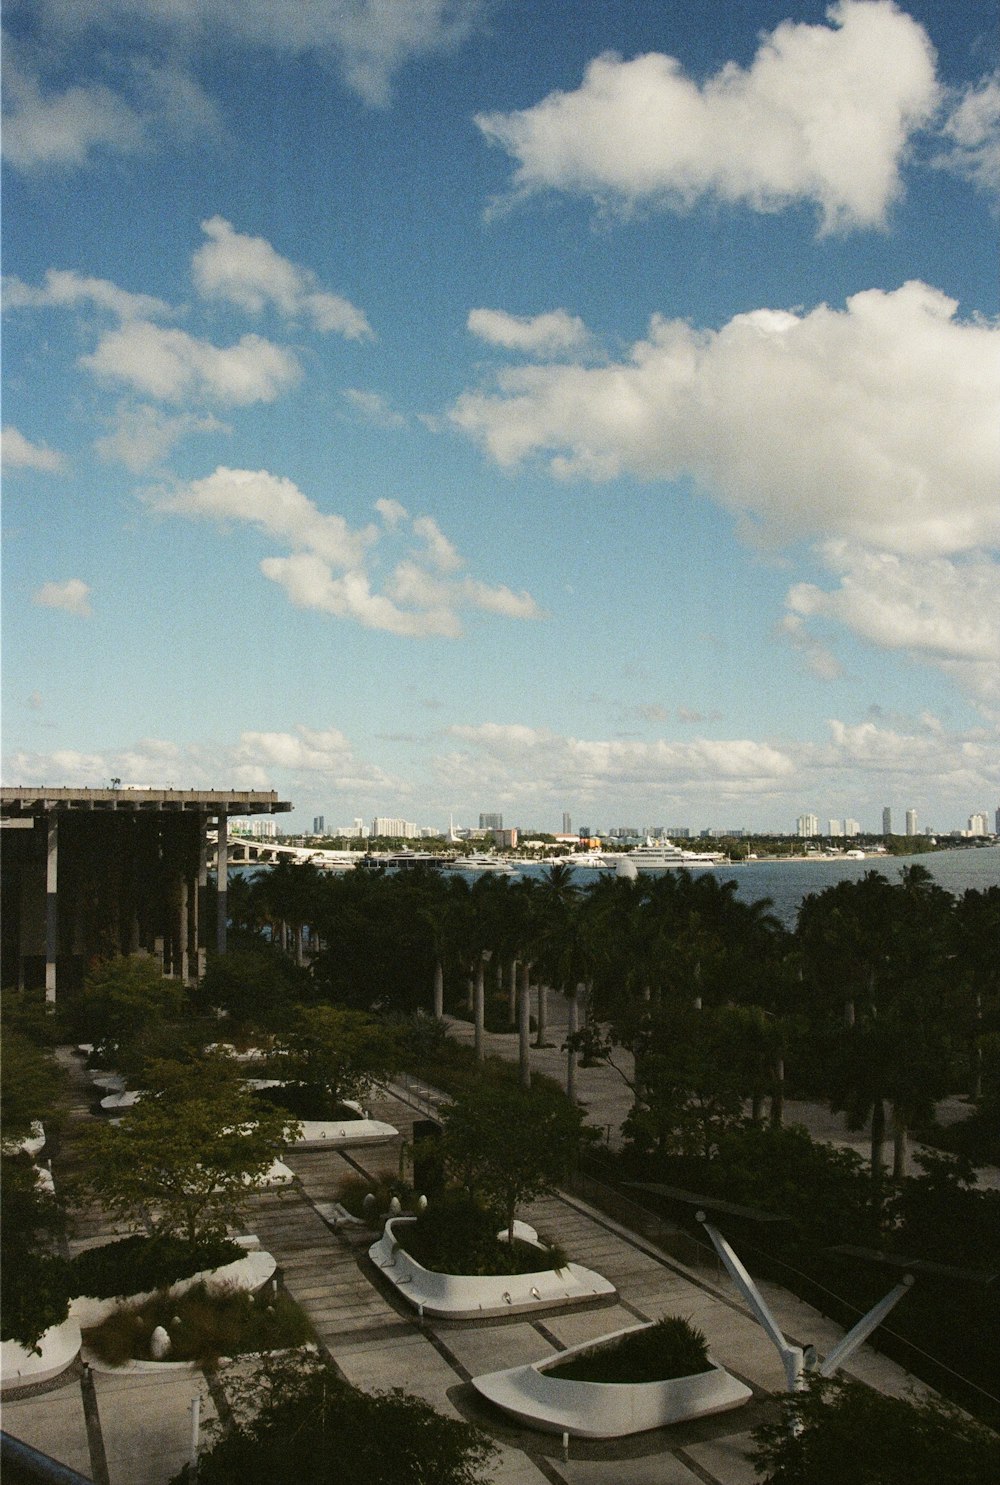 a view of a park with a body of water in the background